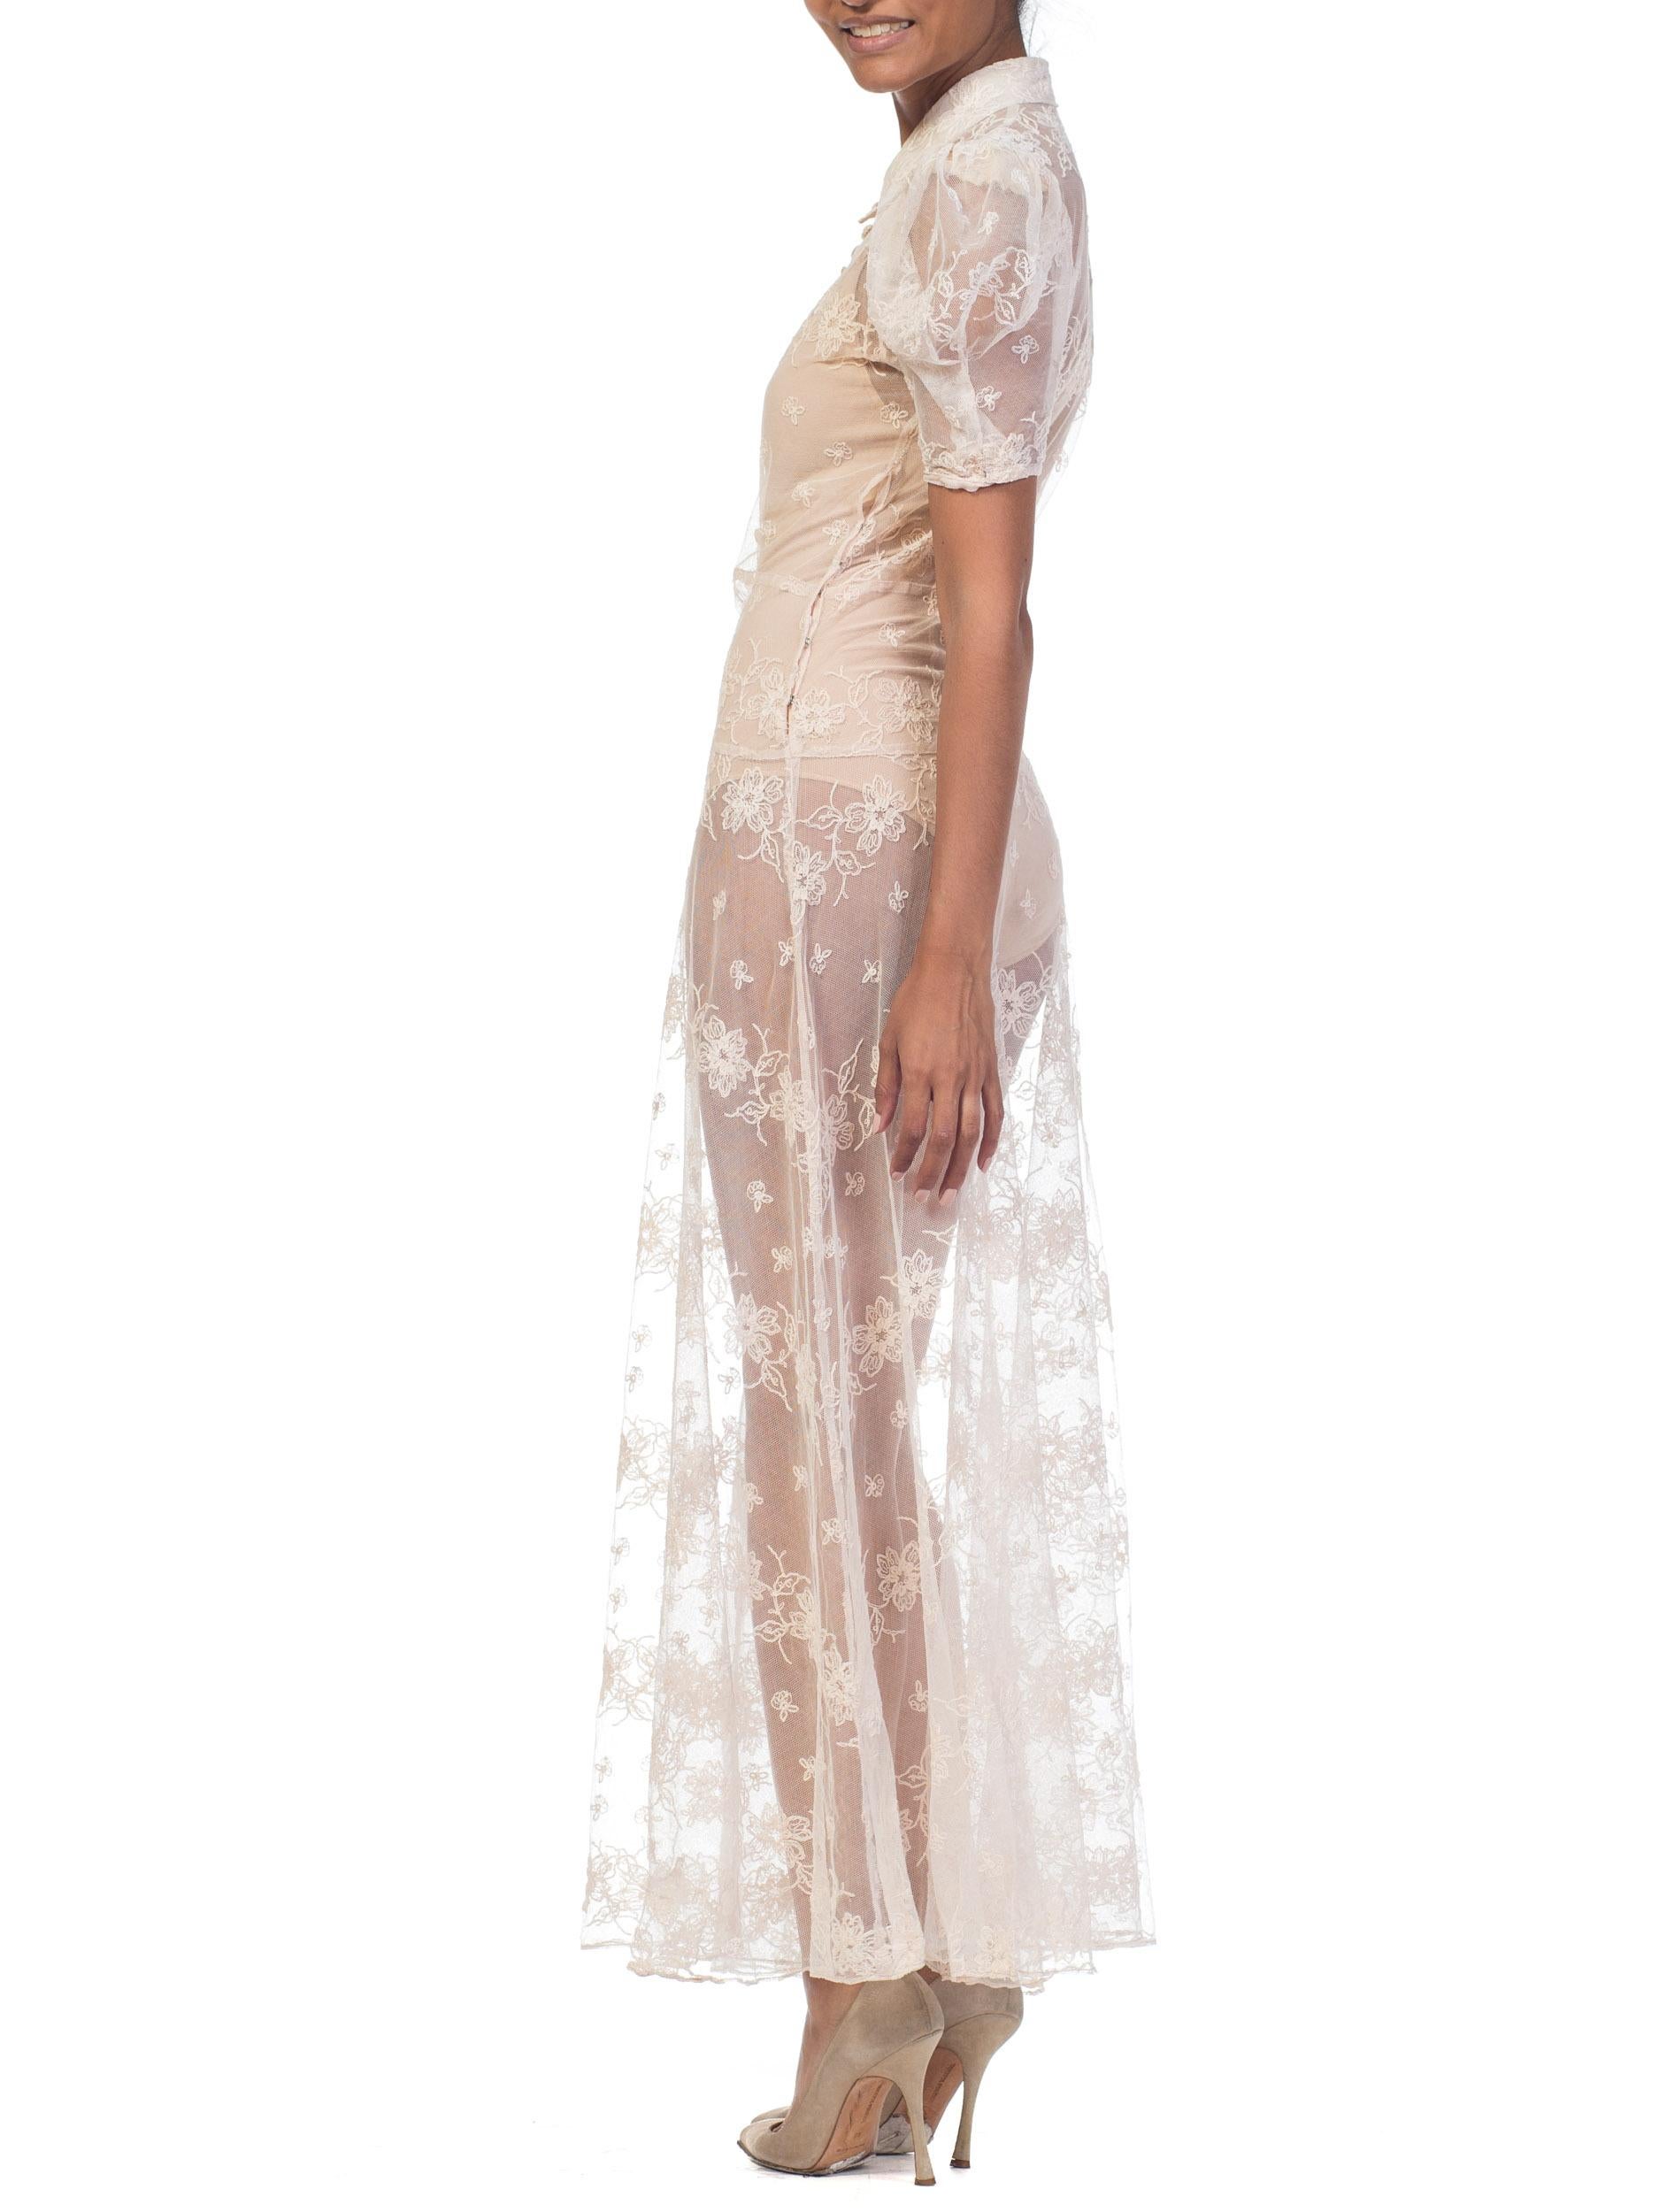 1930s Sheer Lace Net Dress With Floral Embroidery  9